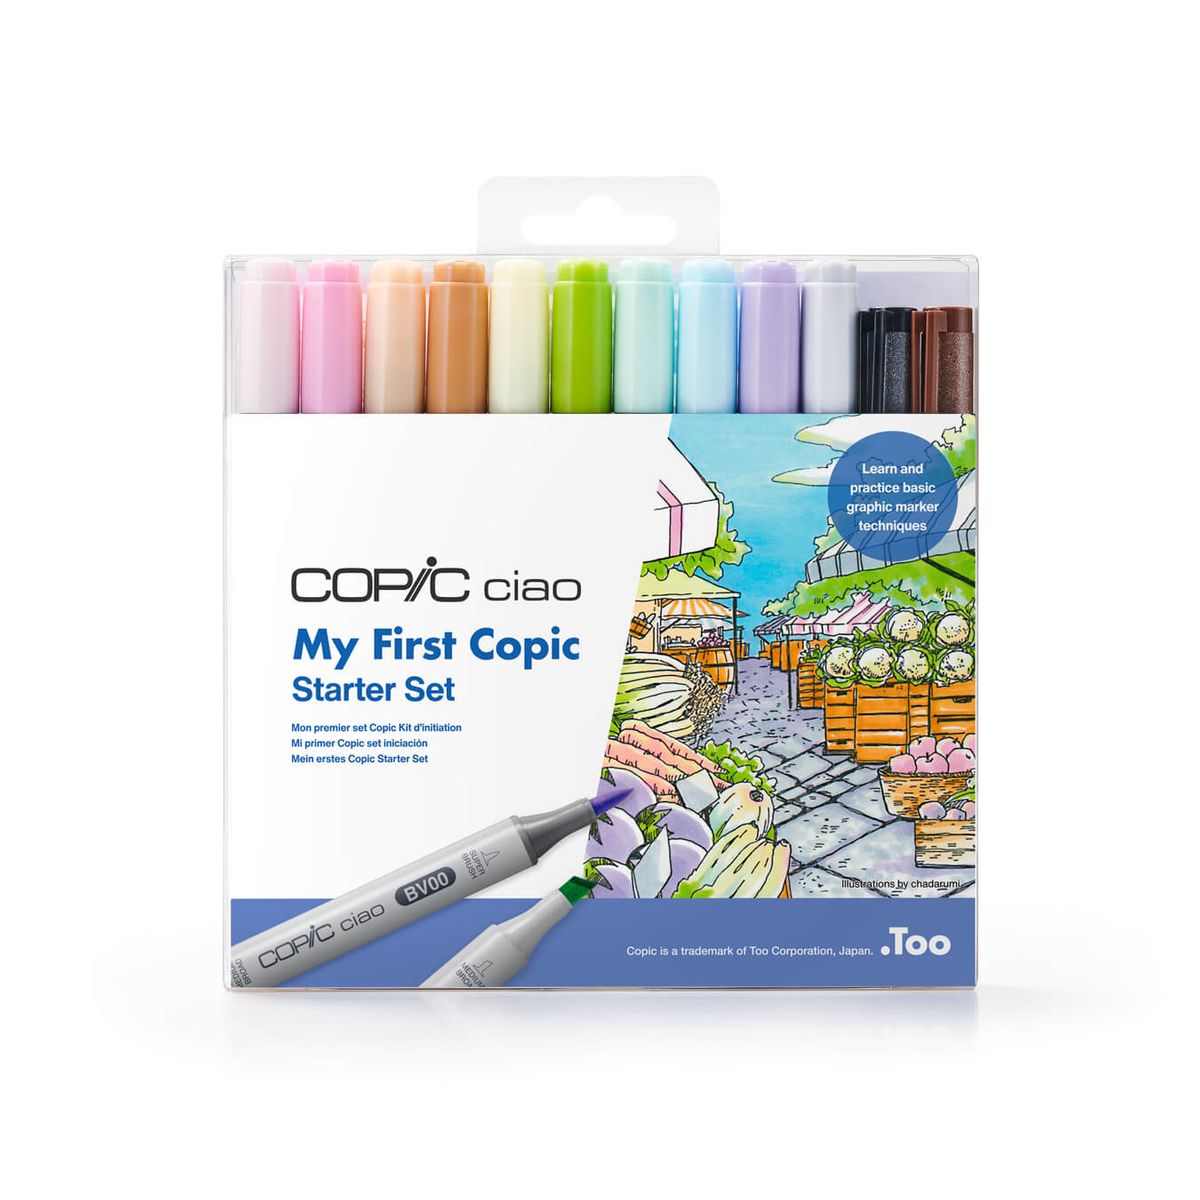 Kit Copic Ciao “my First Copic” Starter C/ 12 Unidades